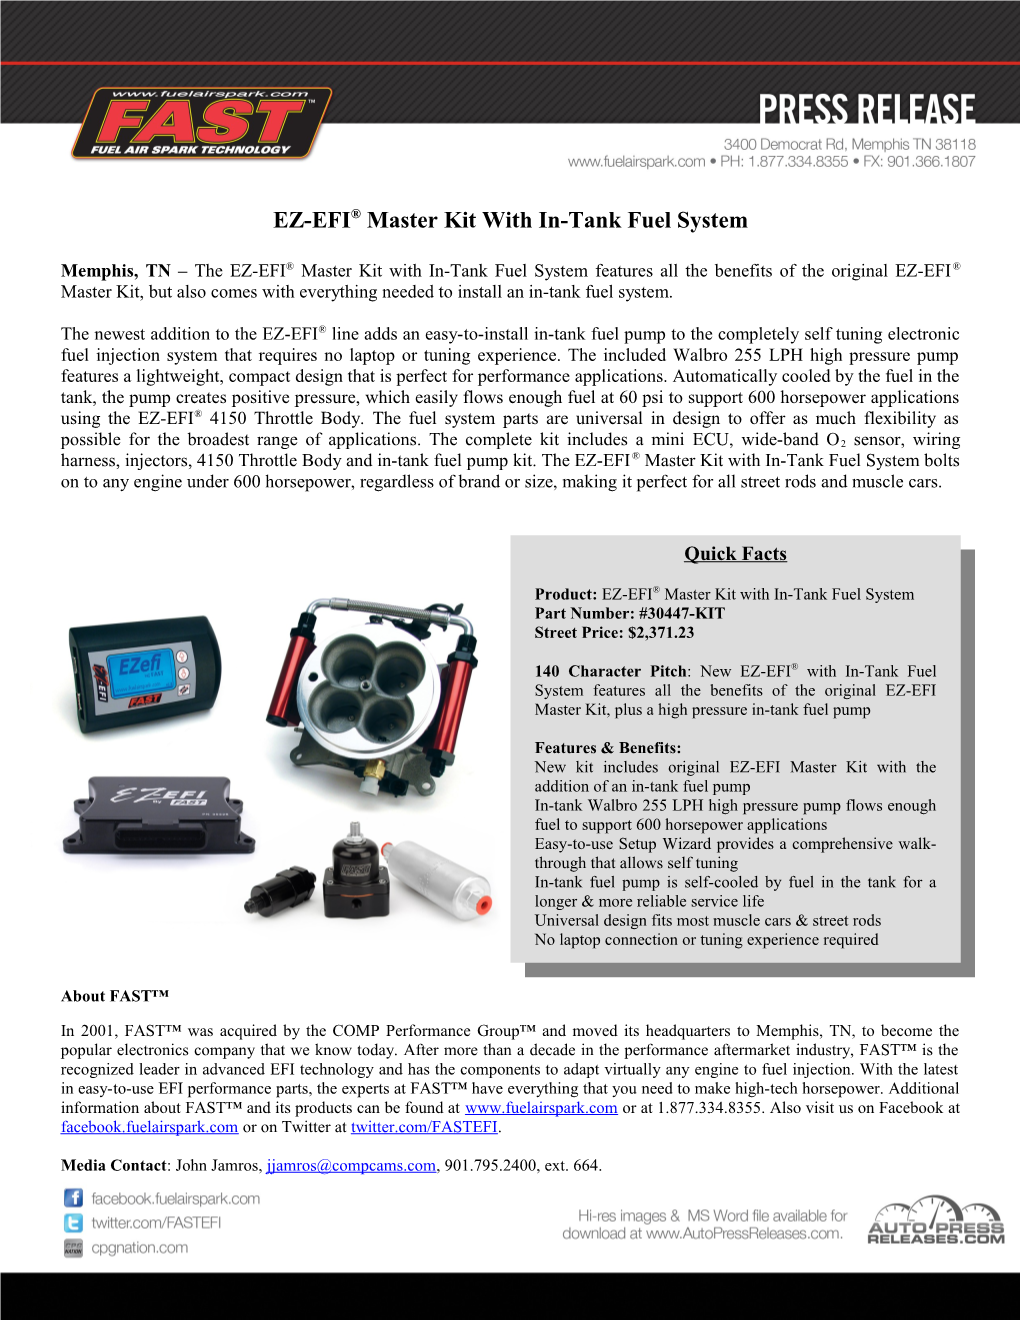 EZ-EFI Master Kit with In-Tank Fuel System